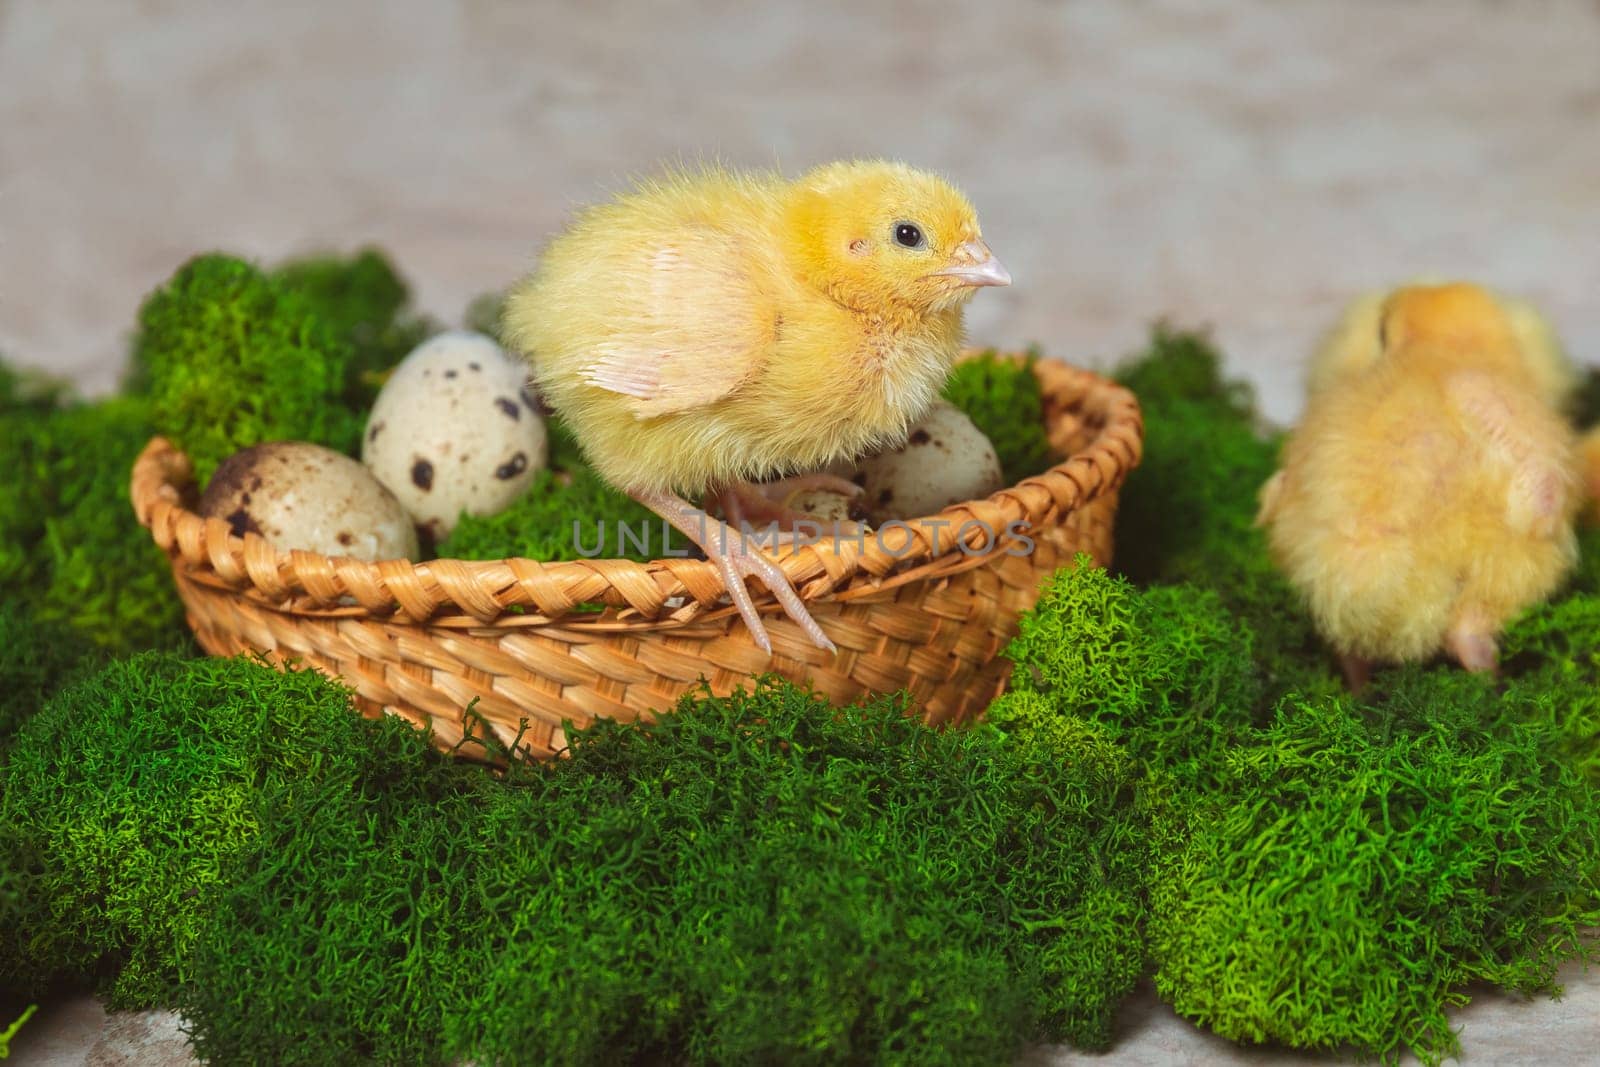 A yellow quail chicken sits on a basket with quail eggs and green moss on a stone background